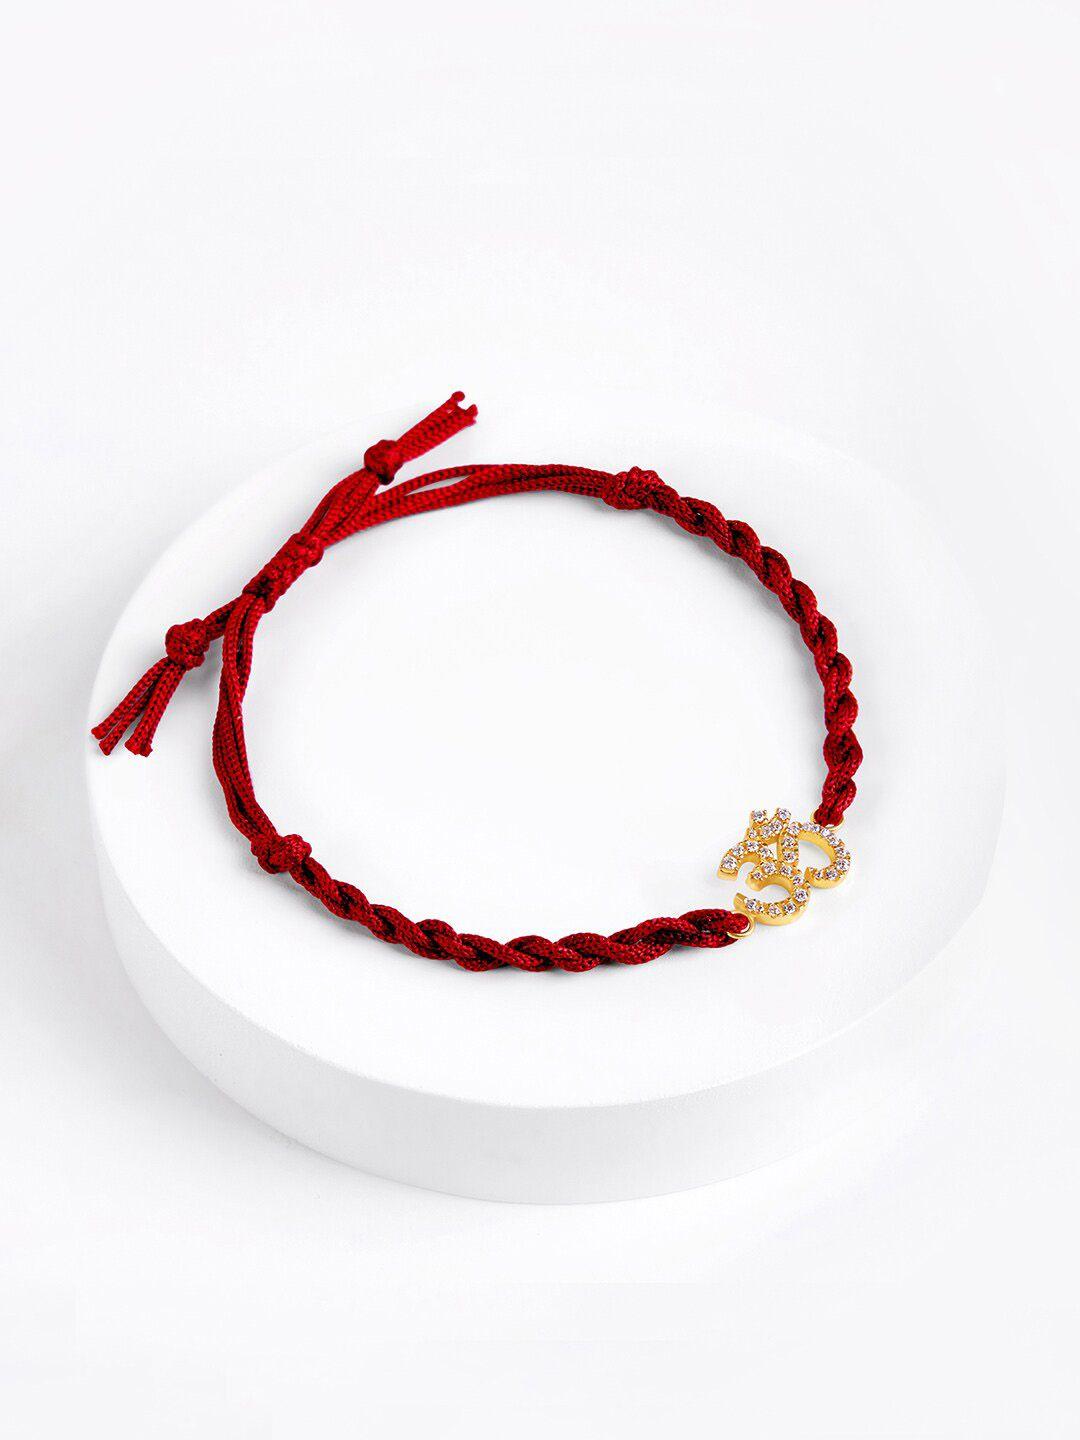 march-by-fablestreet-18kt-gold-plated-om-rakhi